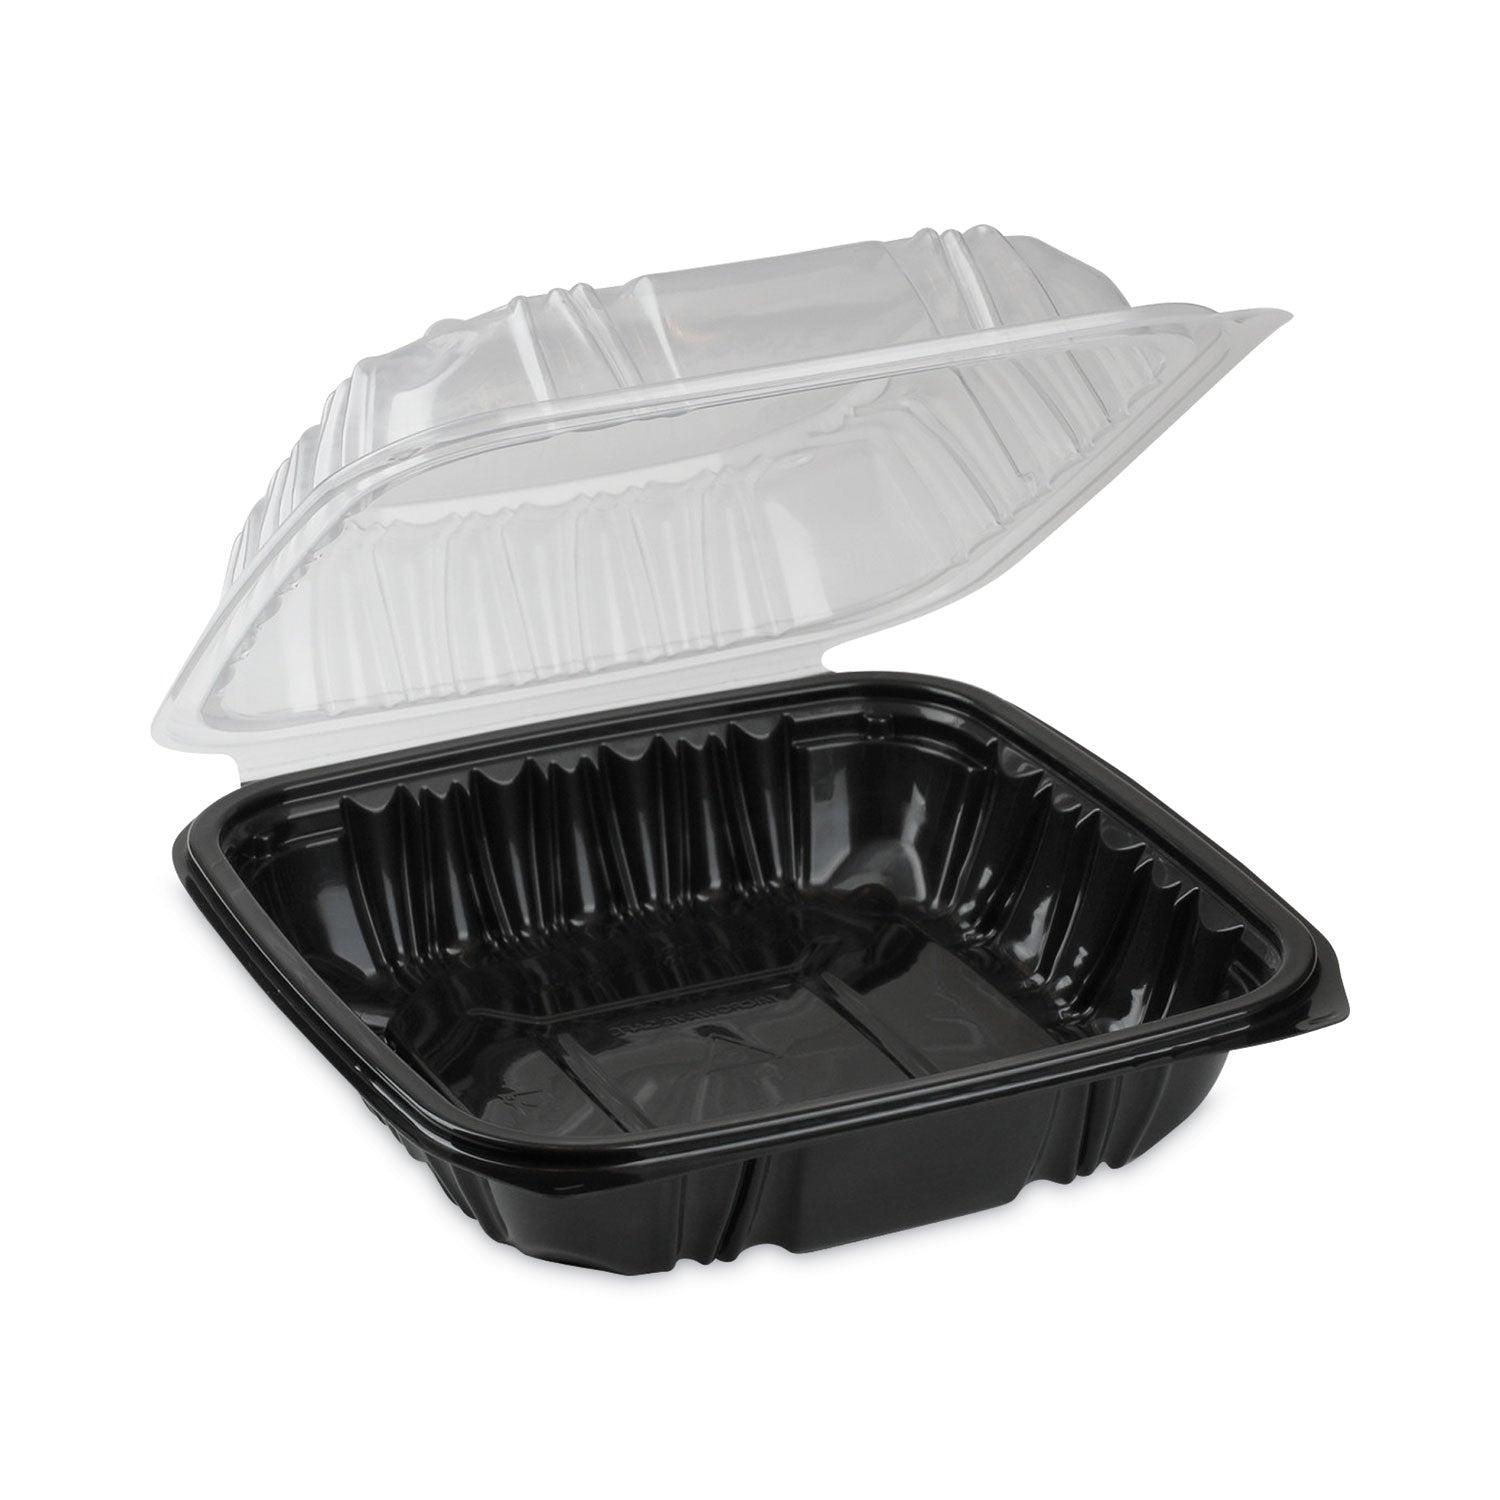 earthchoice-vented-dual-color-microwavable-hinged-lid-container-1-compartment-28oz-75x75x3-black-clear-plastic-150-ct_pctdc757100b000 - 2